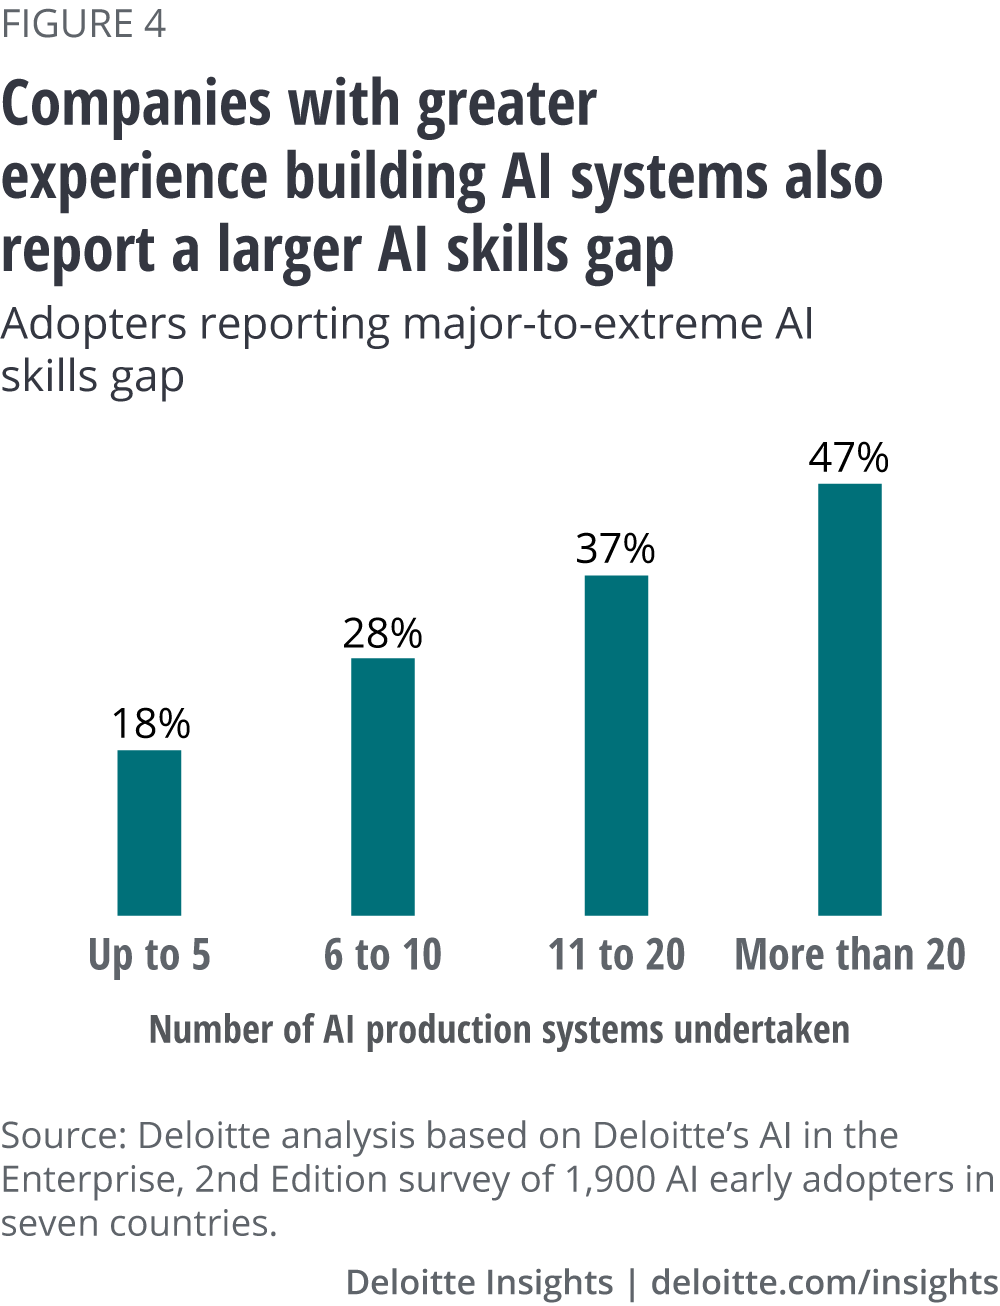 Companies with greater experience building AI systems also report a larger AI skills gap